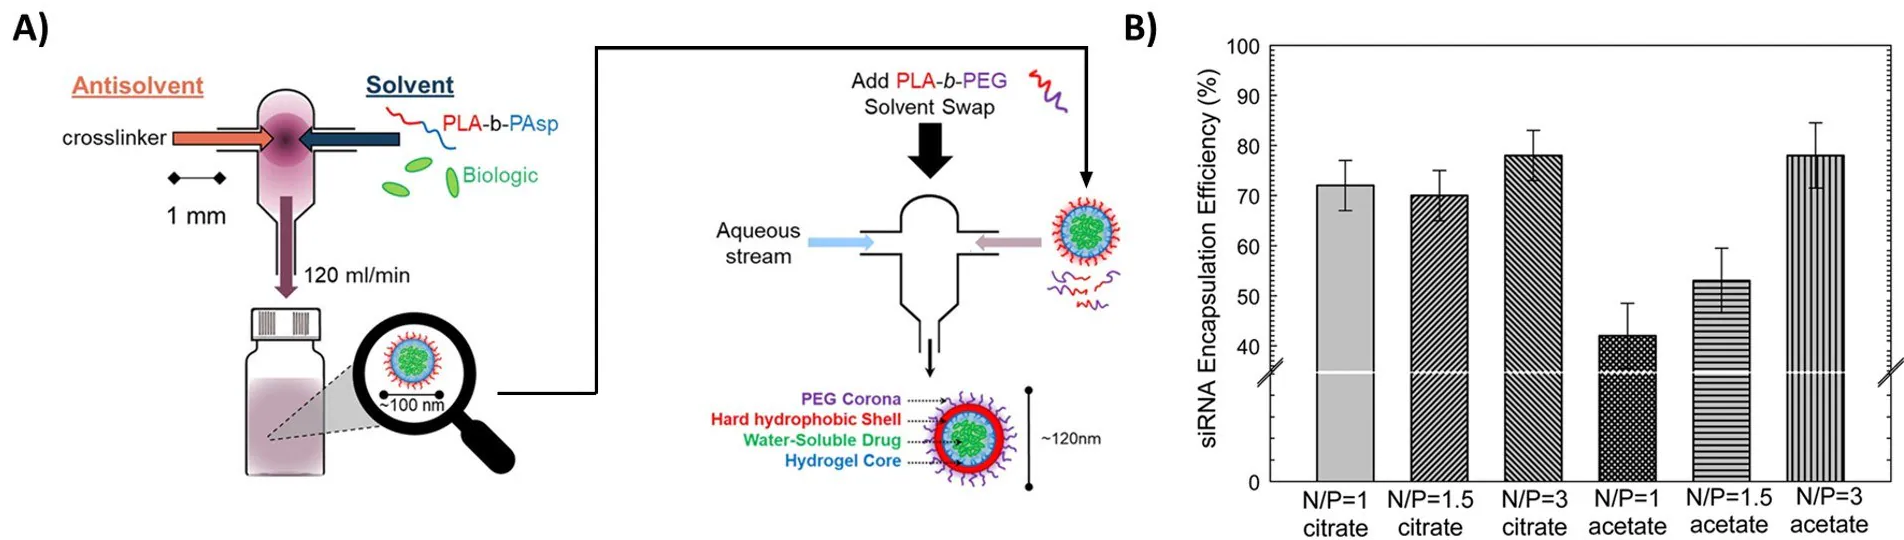 Encapsulation of hydrophilic actives (A) Procedure of iFNP. Precipitation of a biologic or another hydrophilic active occurs by mixing with an organic antisolvent. The resulting inverse nanoparticle is then coated with a second polymer to form a water-dispersible nanoparticle. Reproduced with permission from reference 20, copyright 2014 ACS Publishing. (B) Encapsulation of siRNA using charge pairing. Neutralization of anionic siRNA by cationic lipids allows for the formation of siRNA nanoparticles with very high encapsulation efficiency.